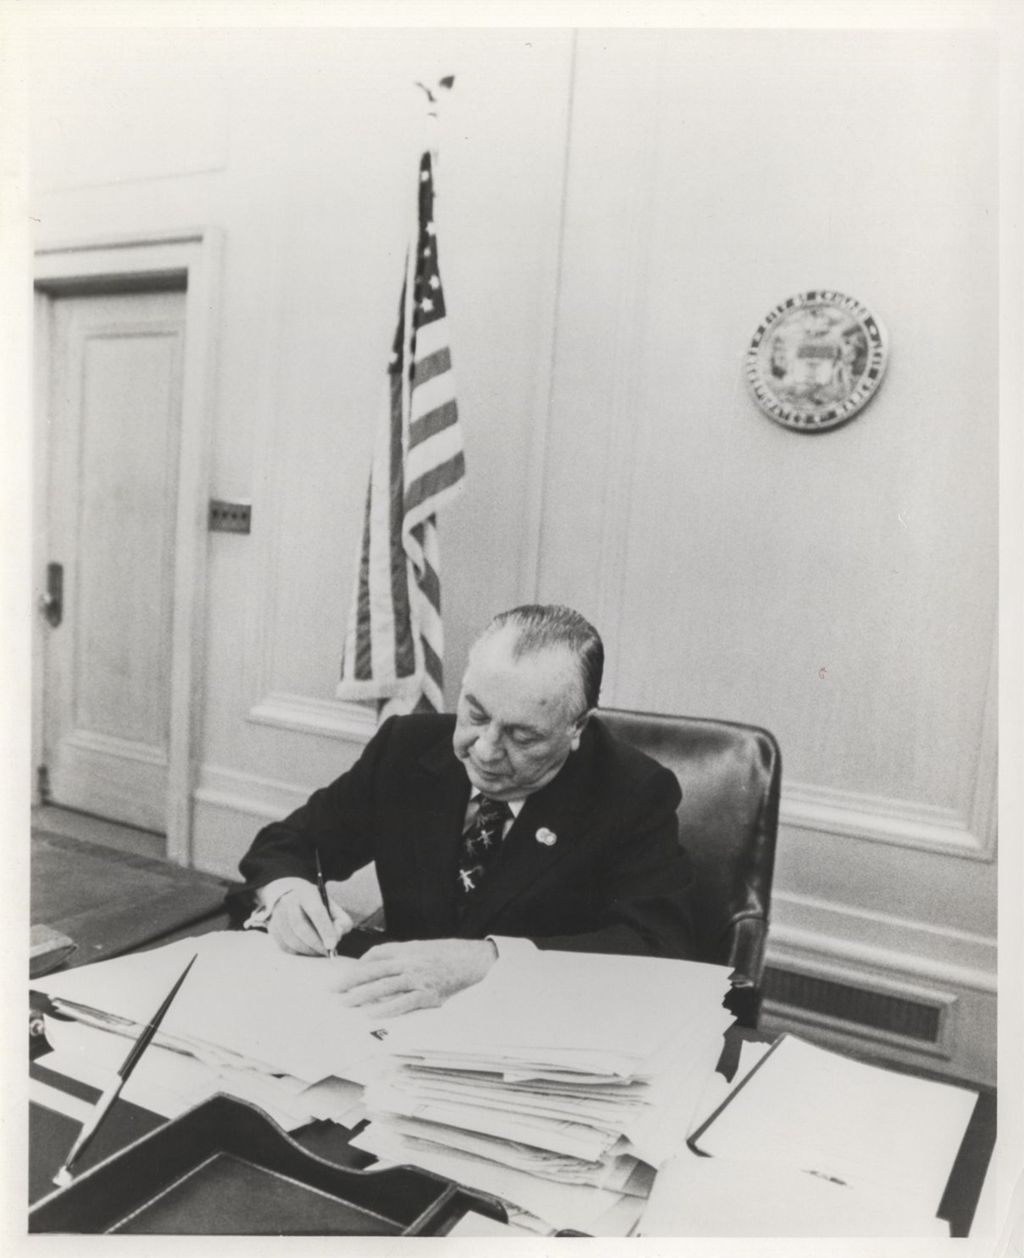 Richard J. Daley signing documents at his desk in City Hall